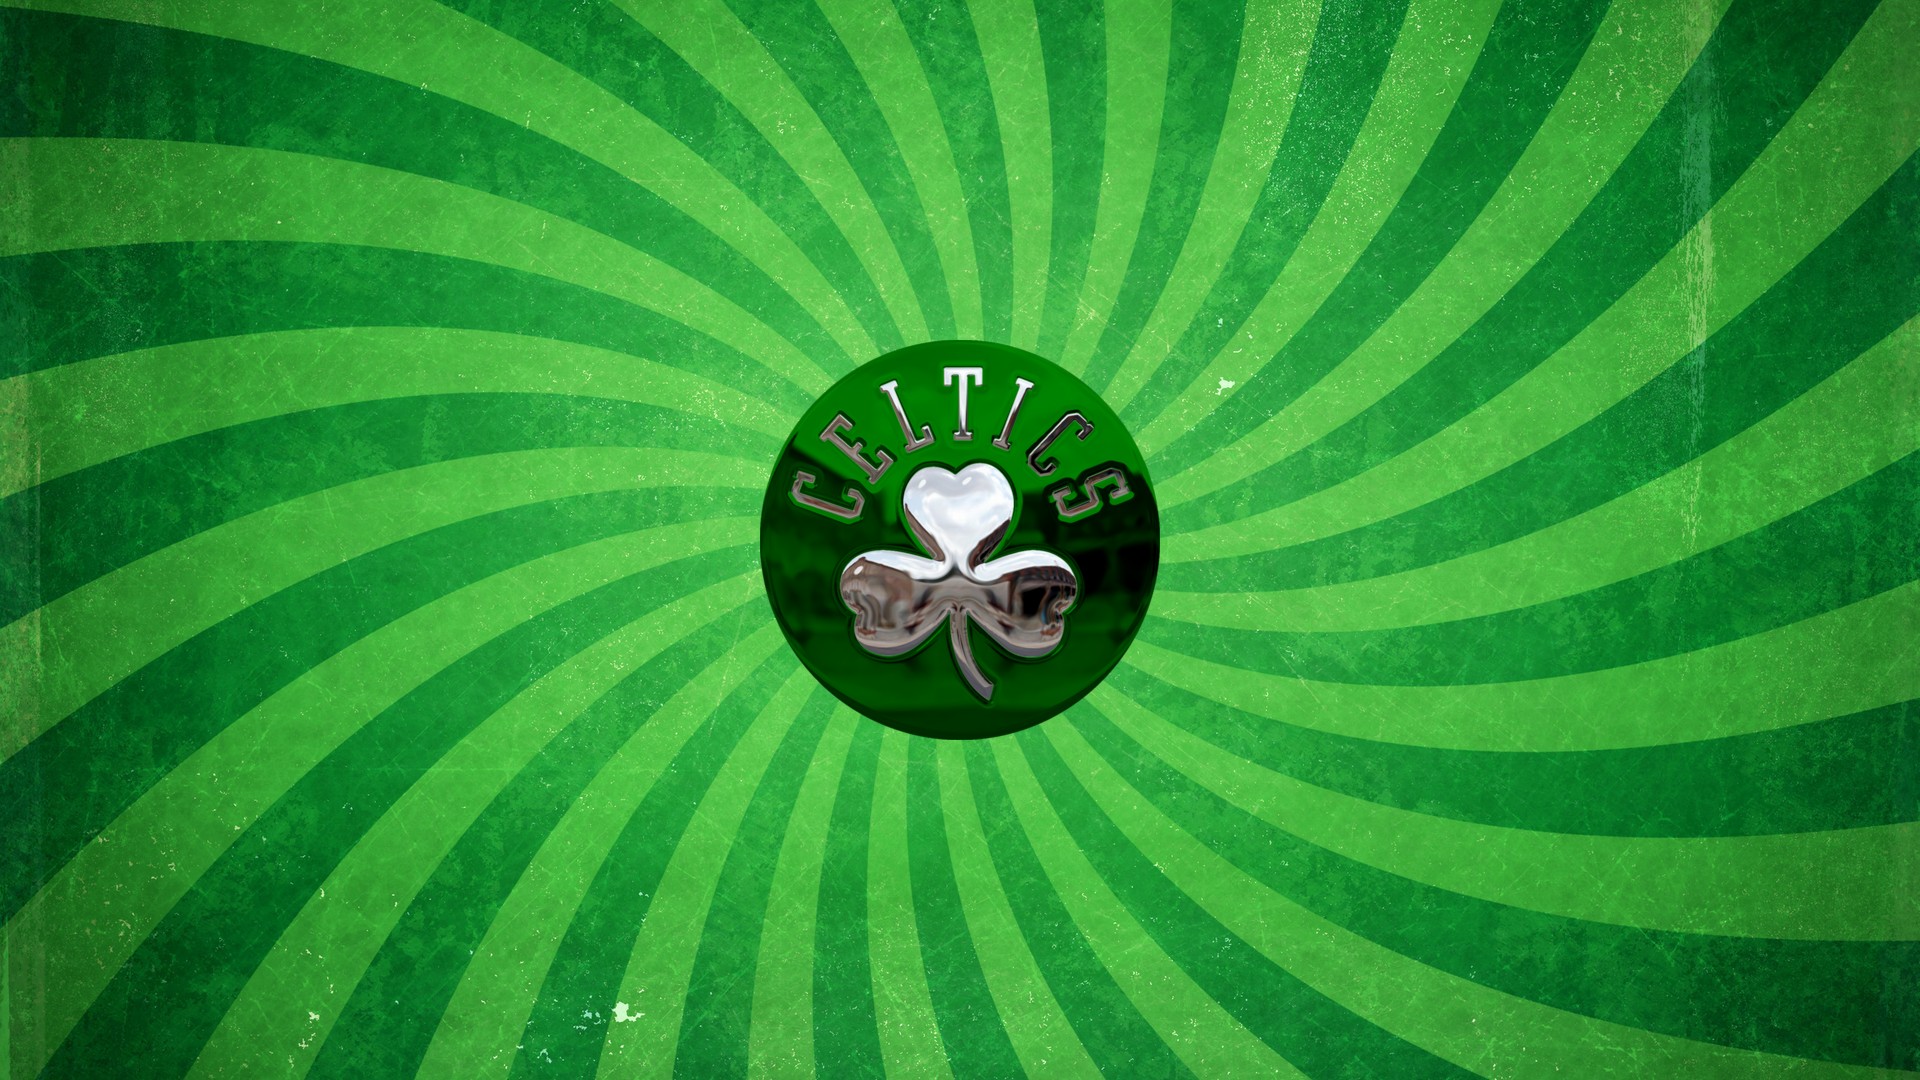 HD Desktop Wallpaper Boston Celtics with image dimensions 1920x1080 pixel. You can make this wallpaper for your Desktop Computer Backgrounds, Windows or Mac Screensavers, iPhone Lock screen, Tablet or Android and another Mobile Phone device